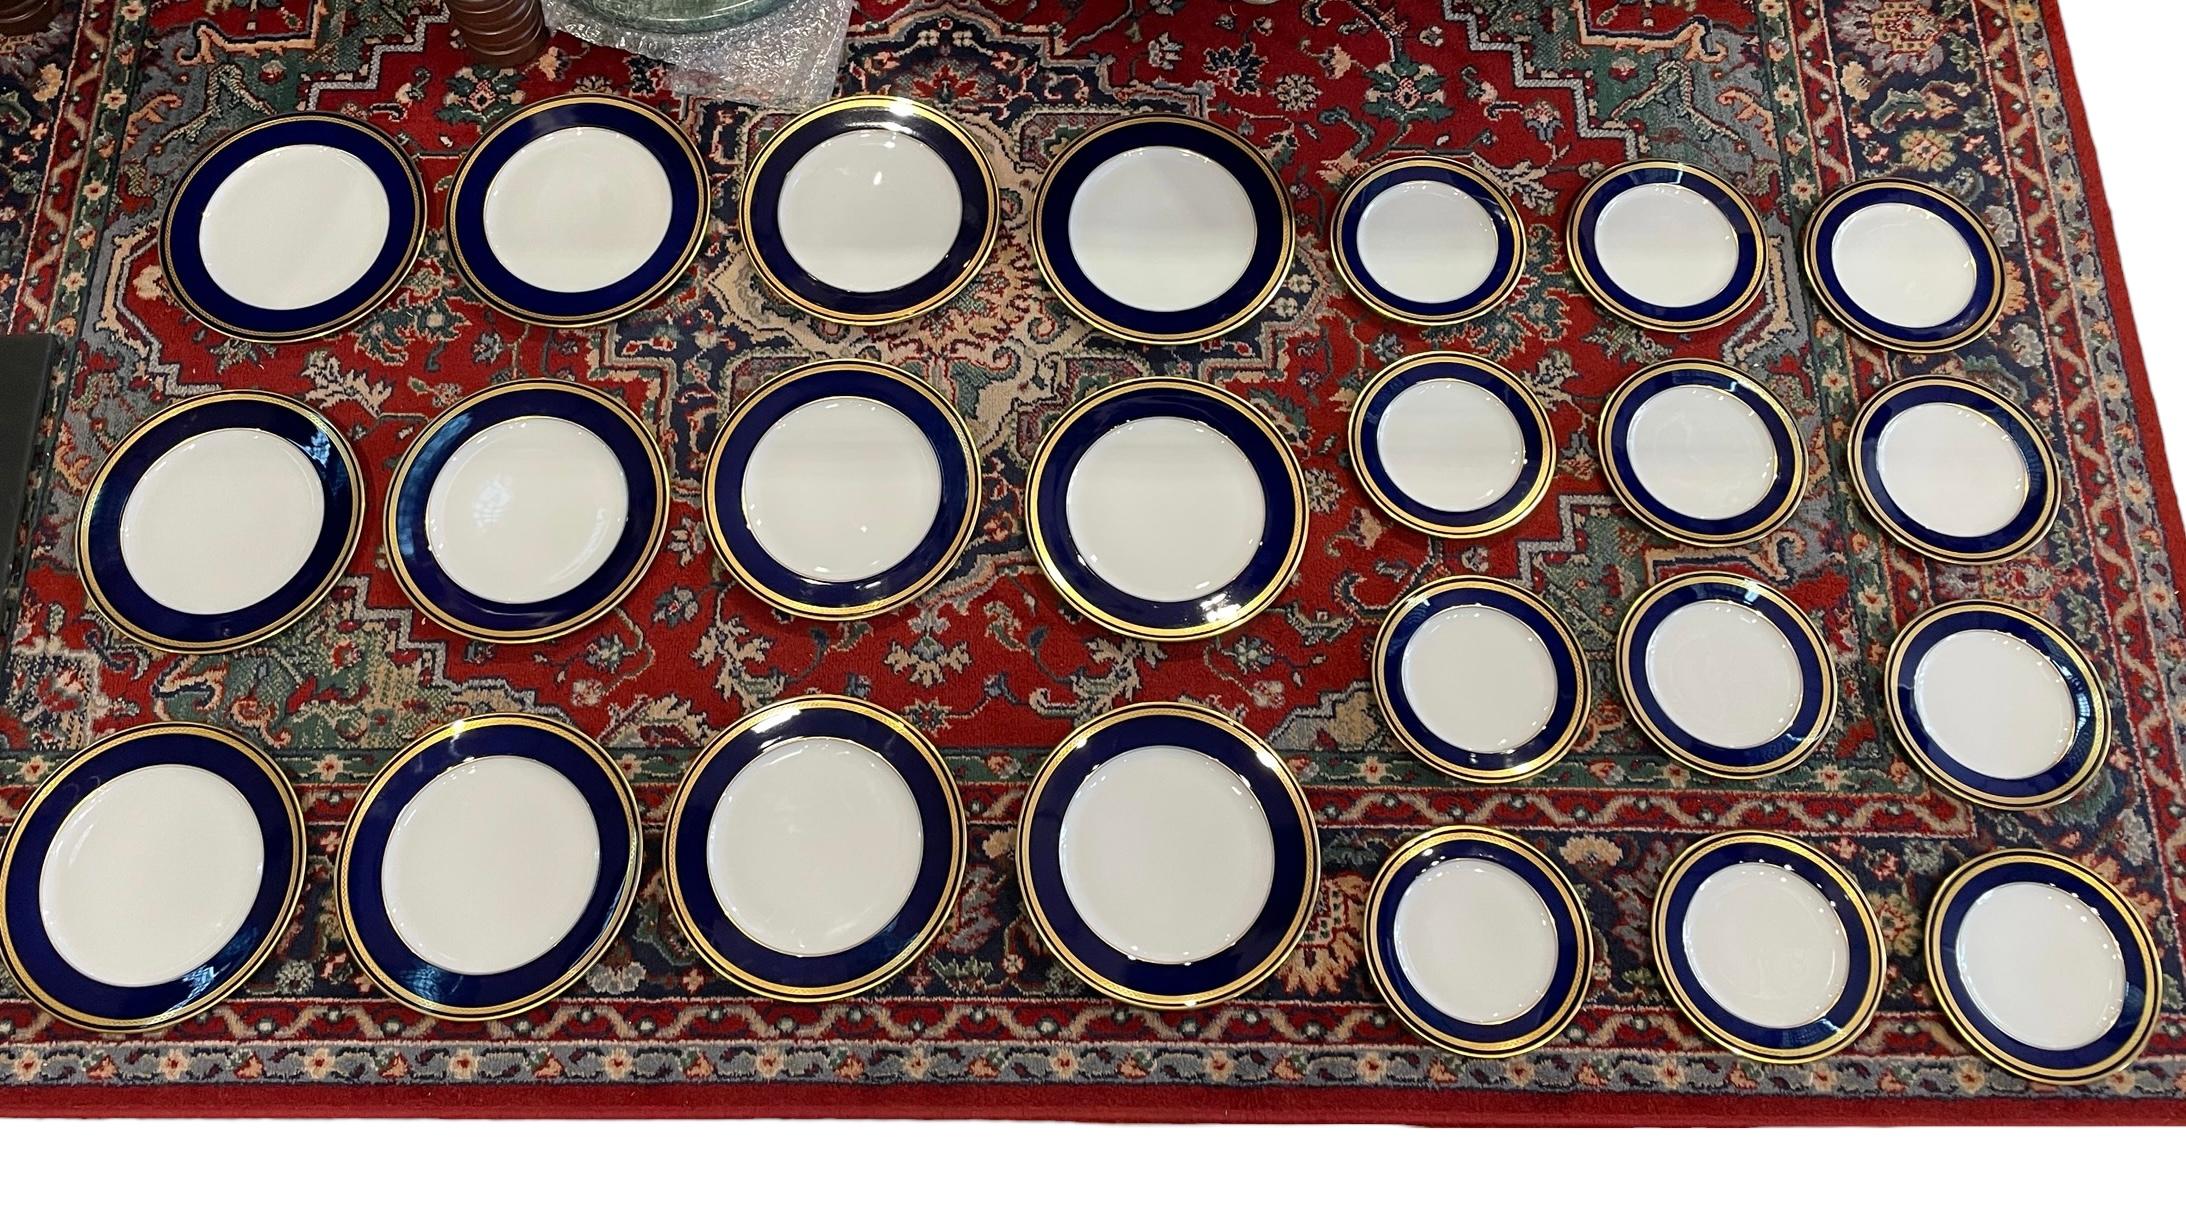 This is a Lorenz Hutschenreuter, Monarch set of 12 dinner plates and 12 salad plates. They depicts a white center with a cobalt blue edge enhanced with a gold braided trim. The salad plate measures 7.63 inches in diameter and 0.13 inches in height.